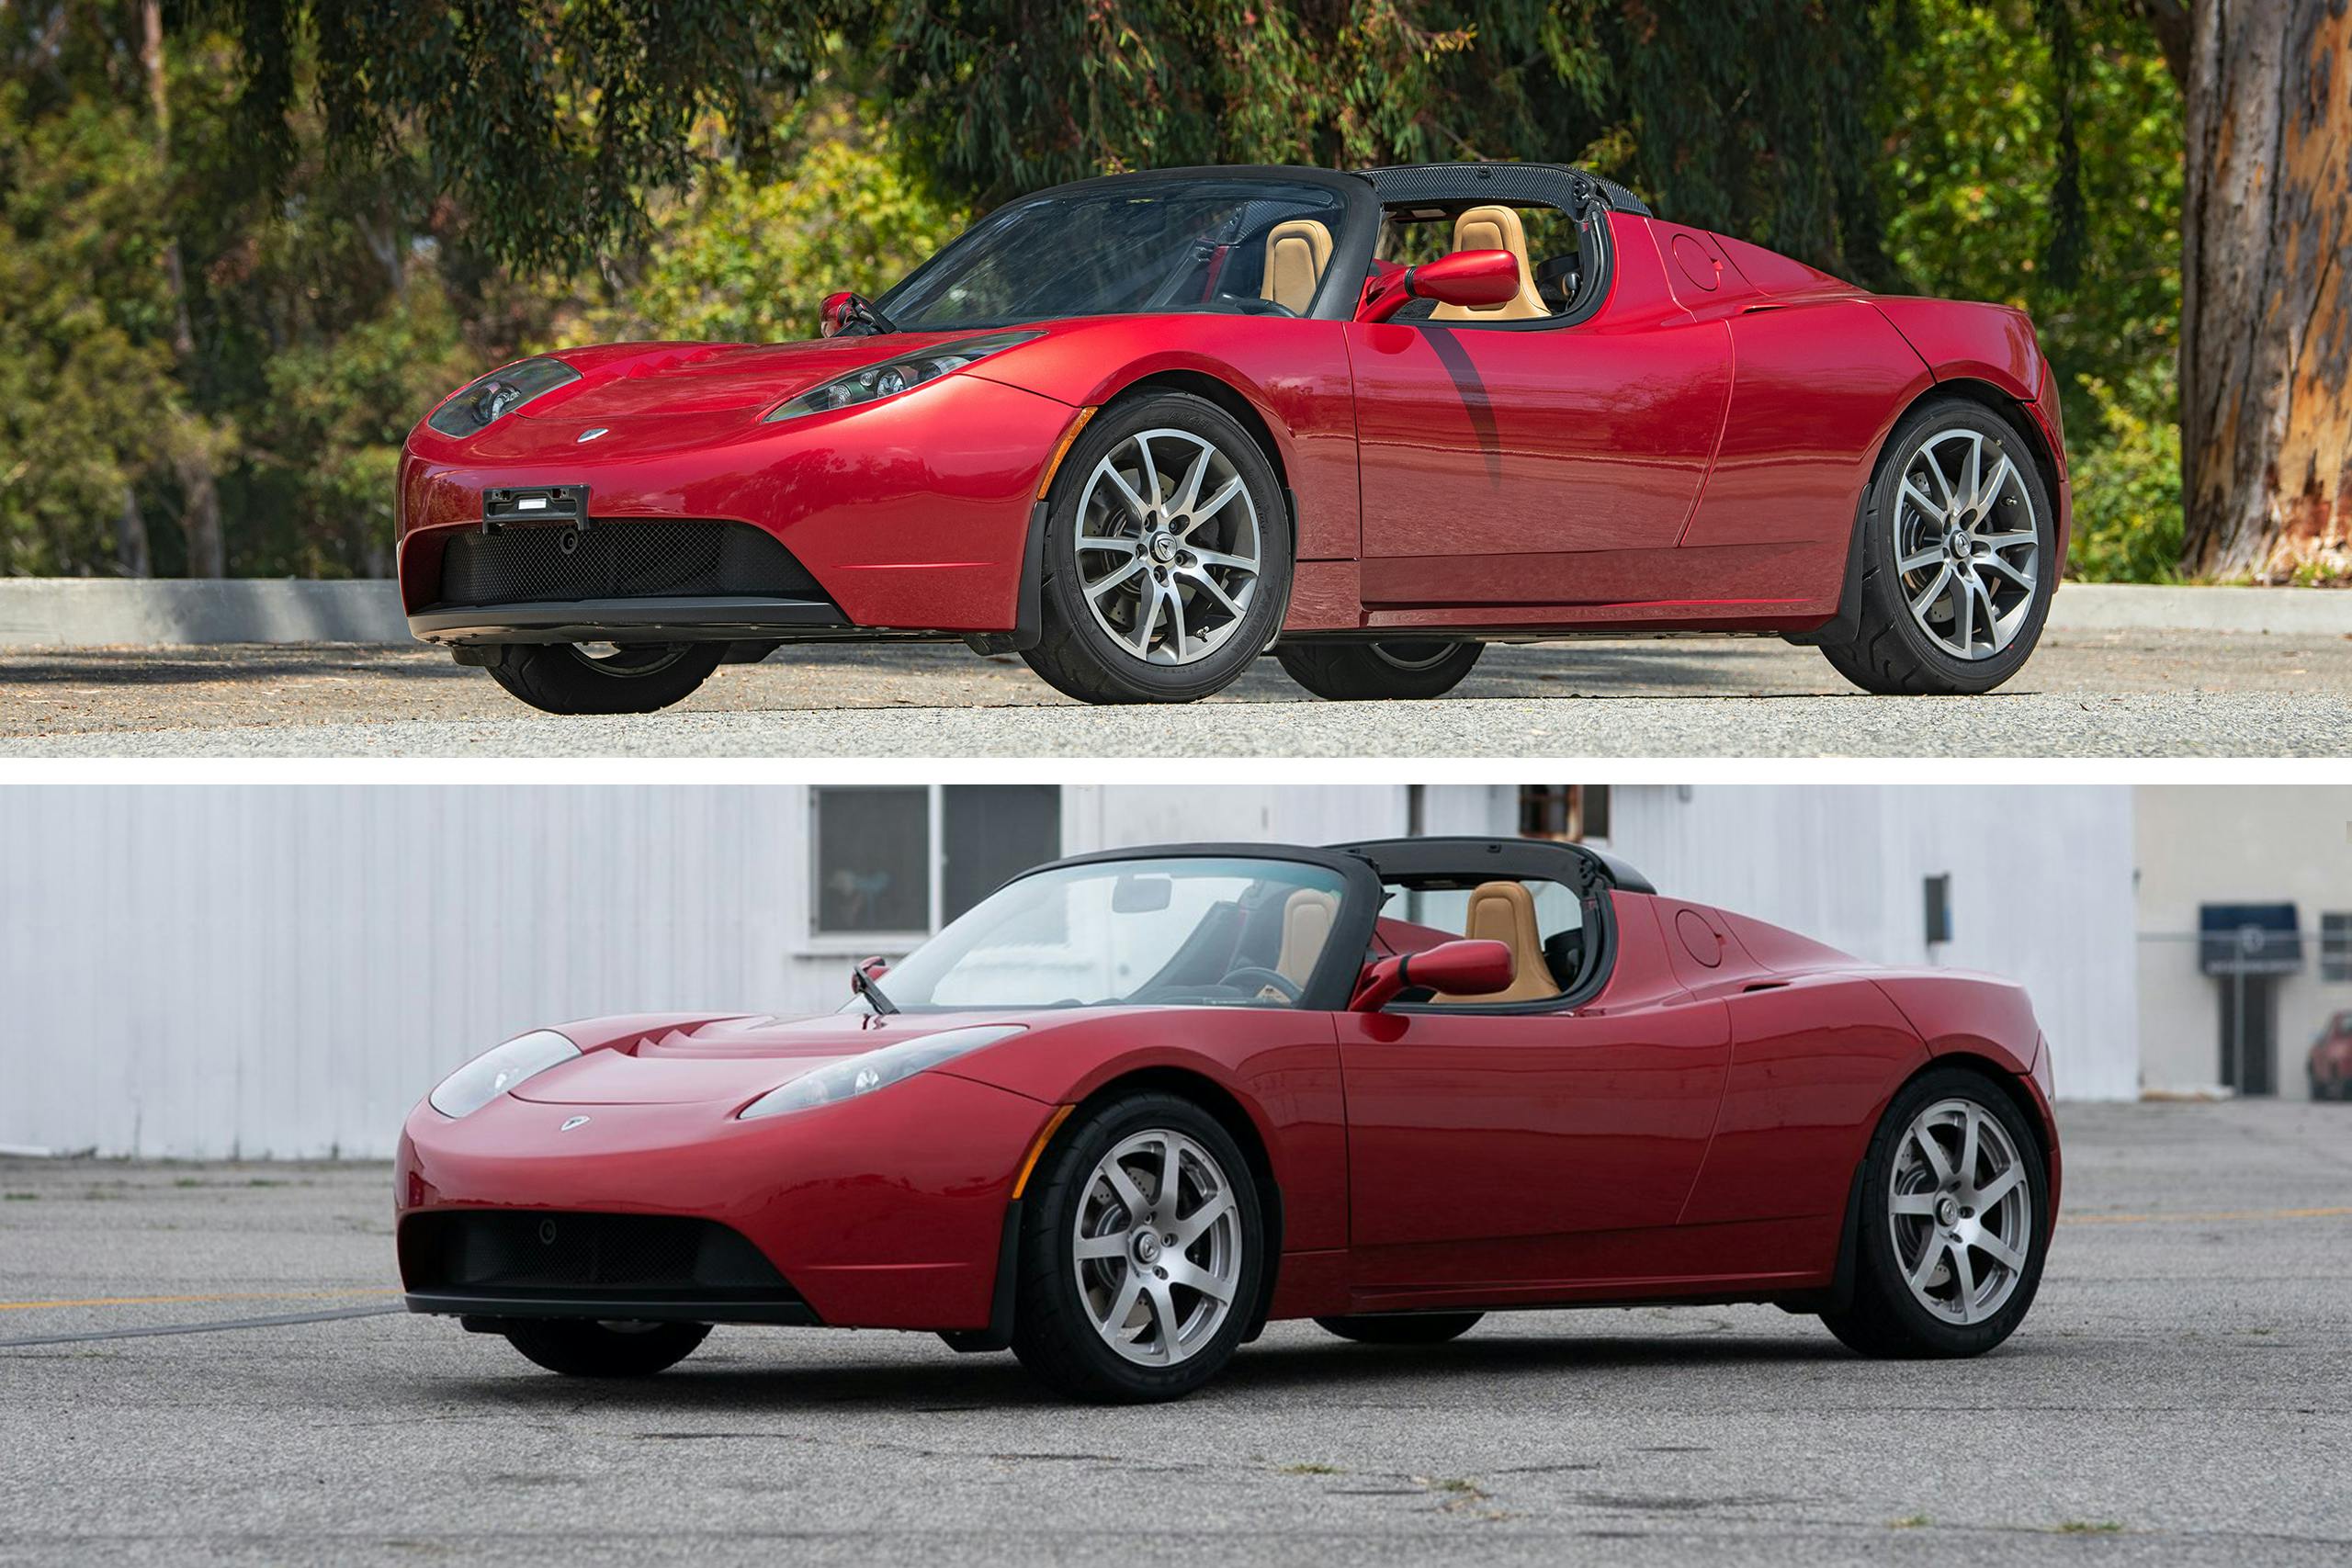 Interior Protective Case Cover Fits Tesla Roadster